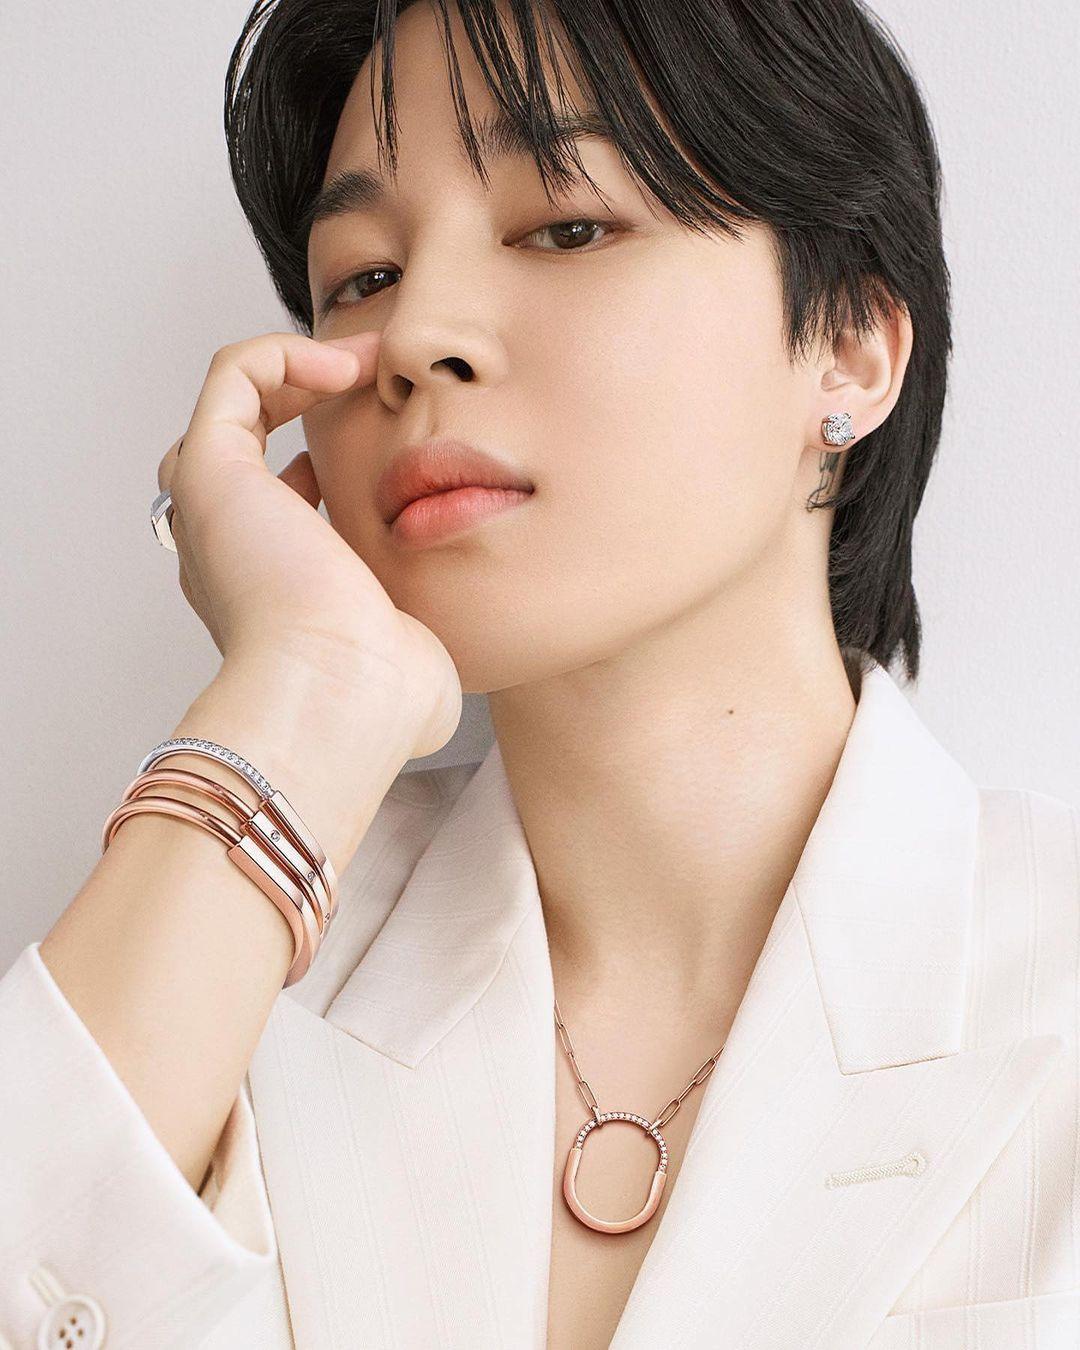 Jimin's outfit for the Tiffany & Co. photoshoot was pure class. 